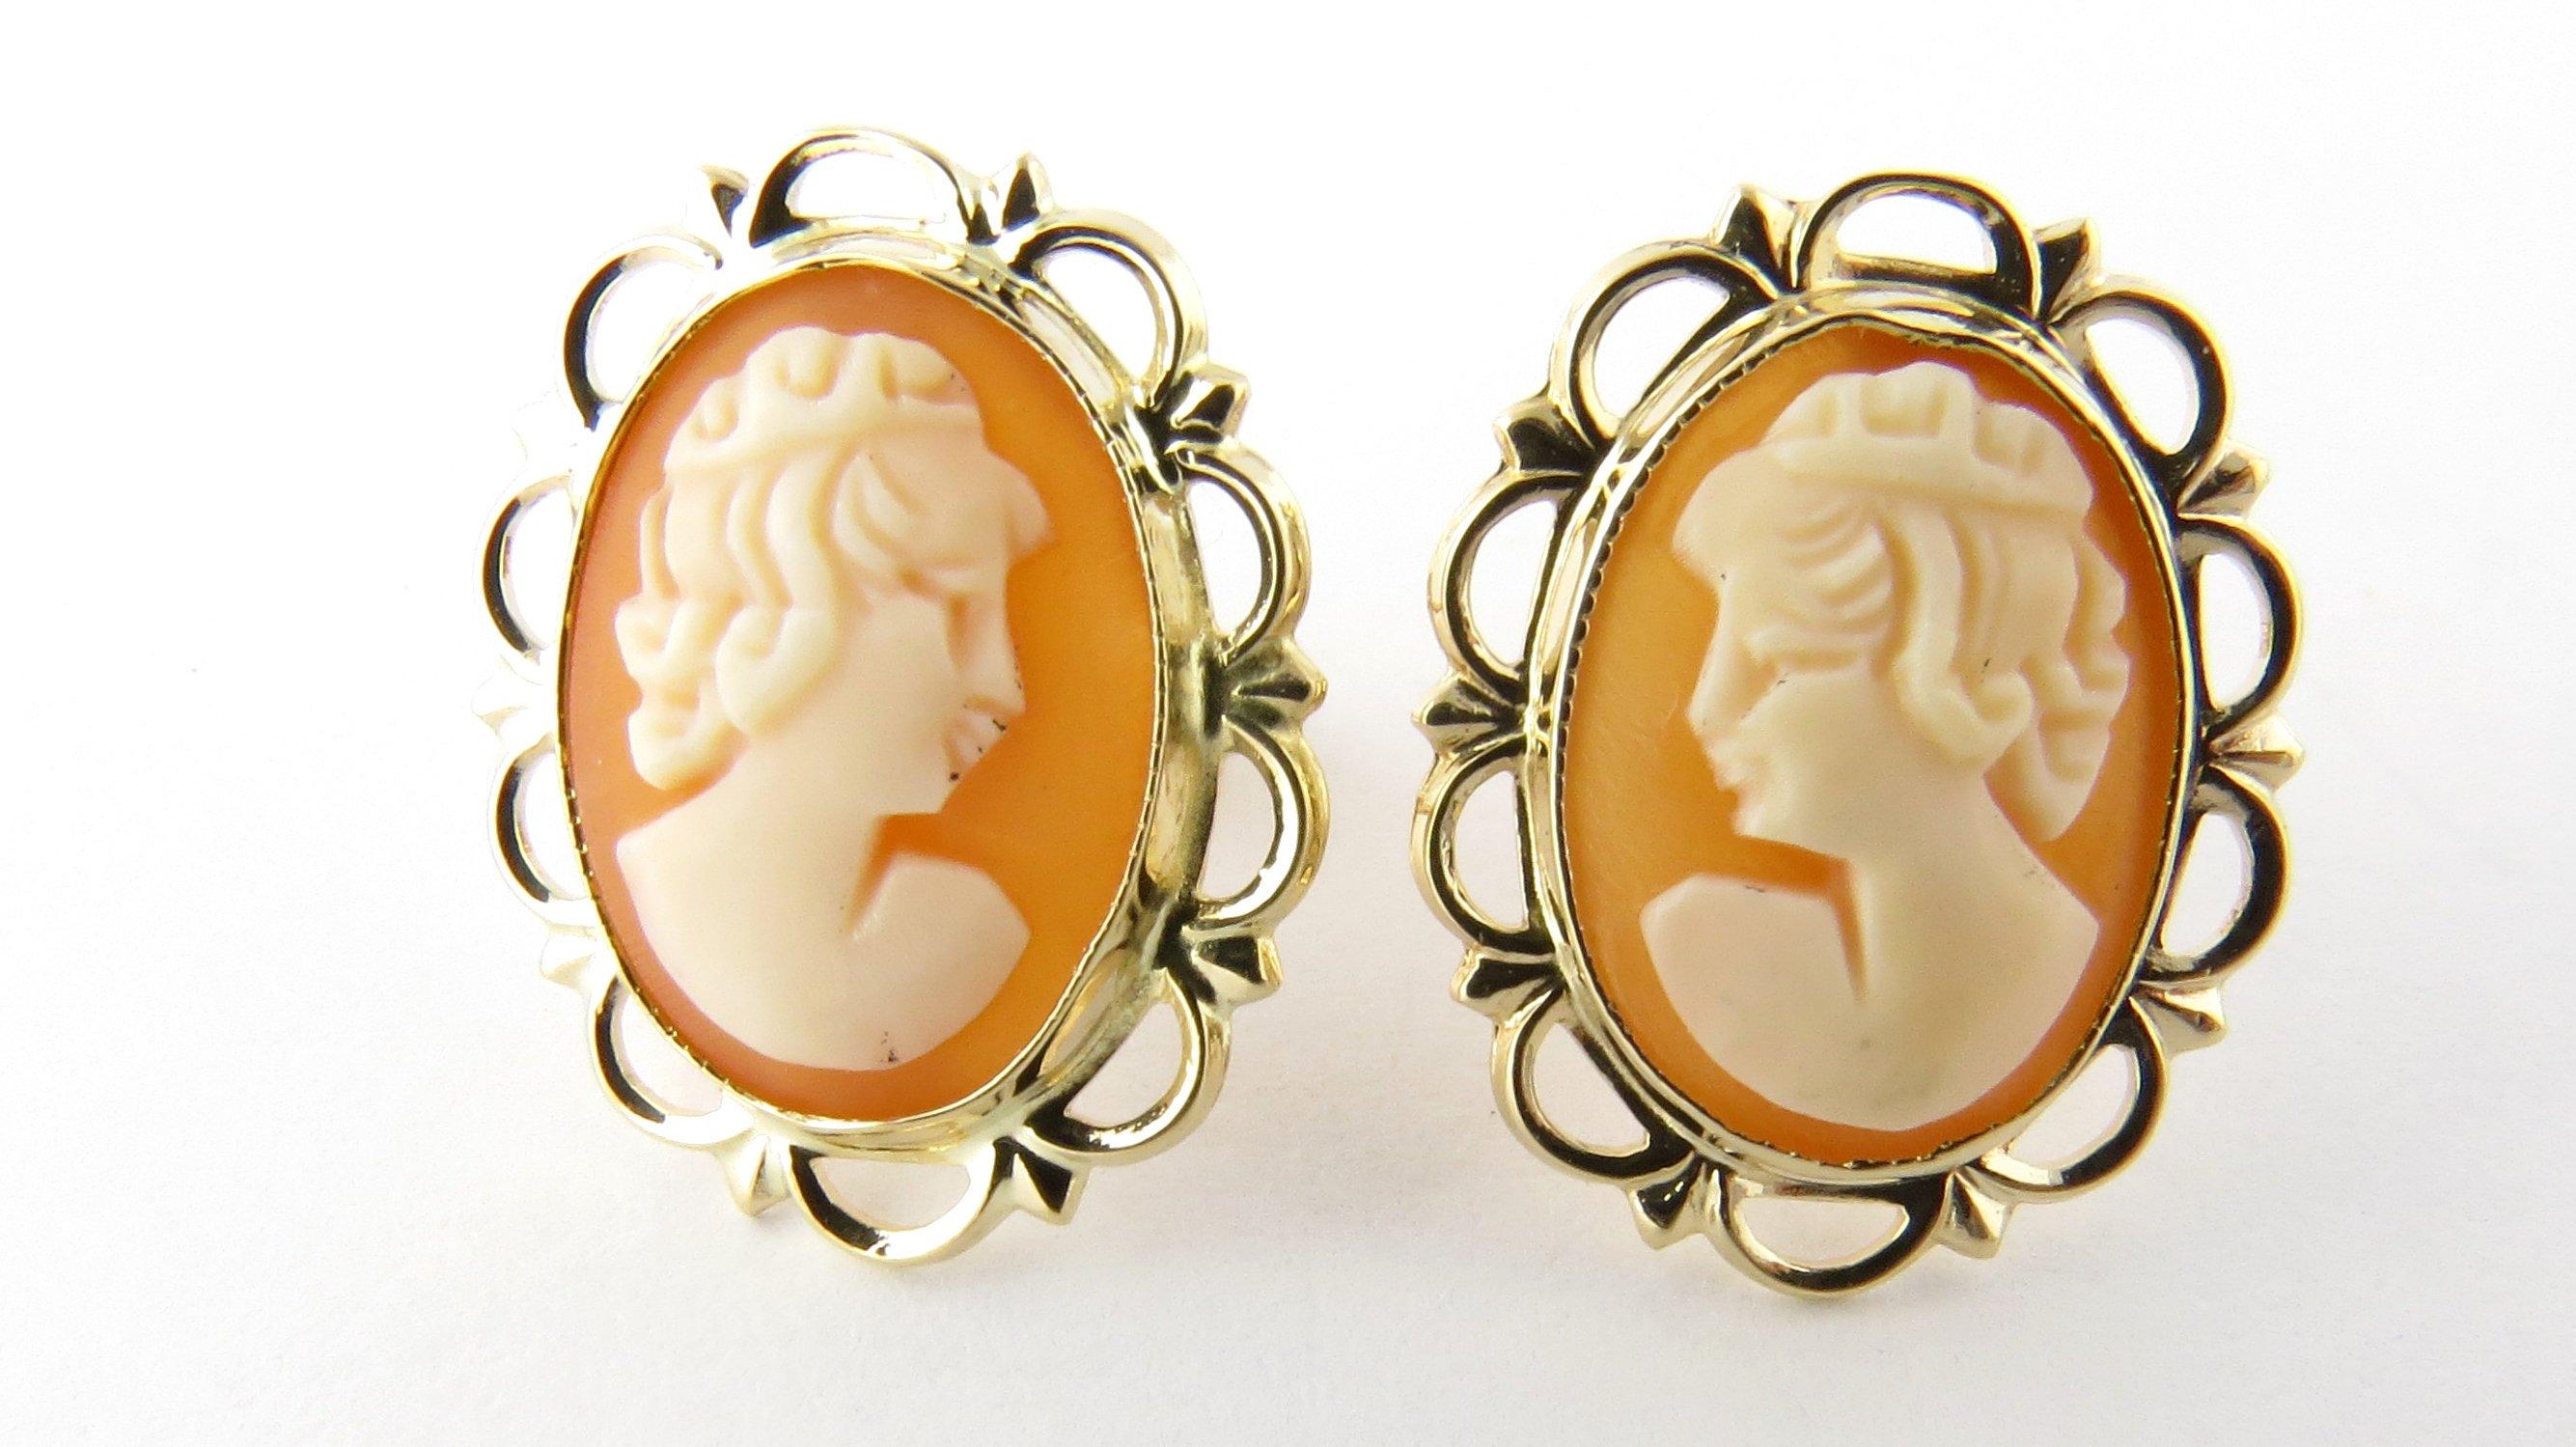 Vintage 14 Karat Yellow Gold Cameo Earrings-

These lovely cameo earrings each feature a lovely lady in profile framed in beautifully detailed 14K yellow gold. Push back closures.

Size: 19 mm x 15 mm

Weight: 2.1 dwt. / 3.4 gr.

Hallmark: 14K

Very